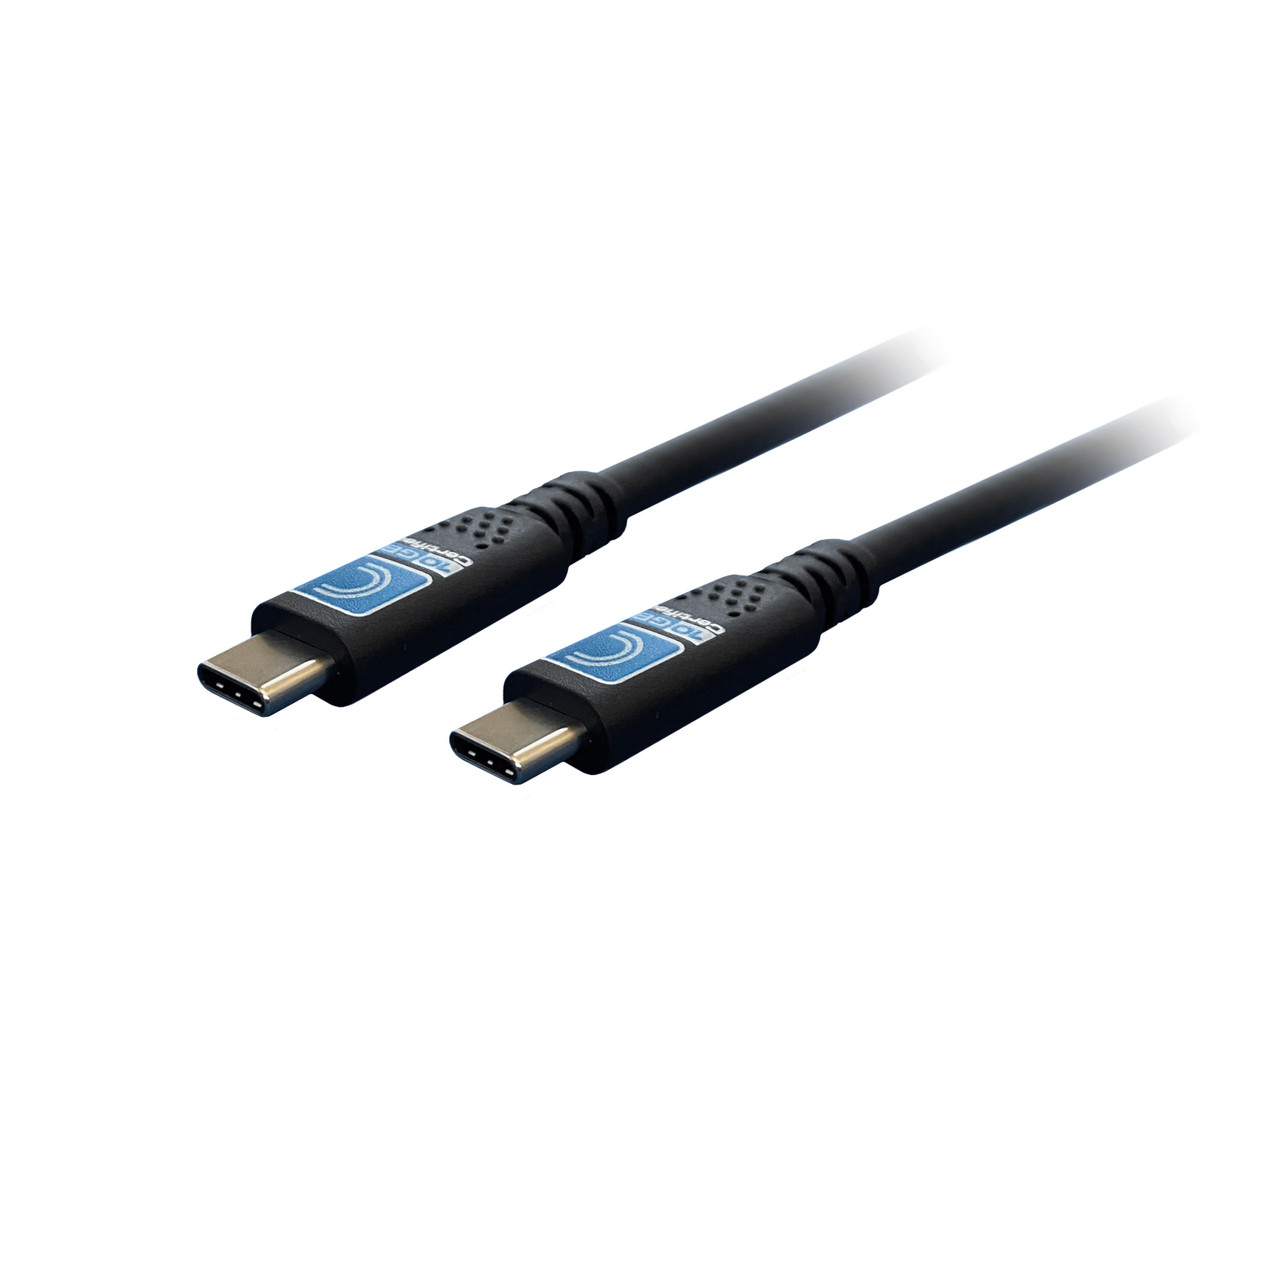 4K Certified USB Type C to HDMI Cable